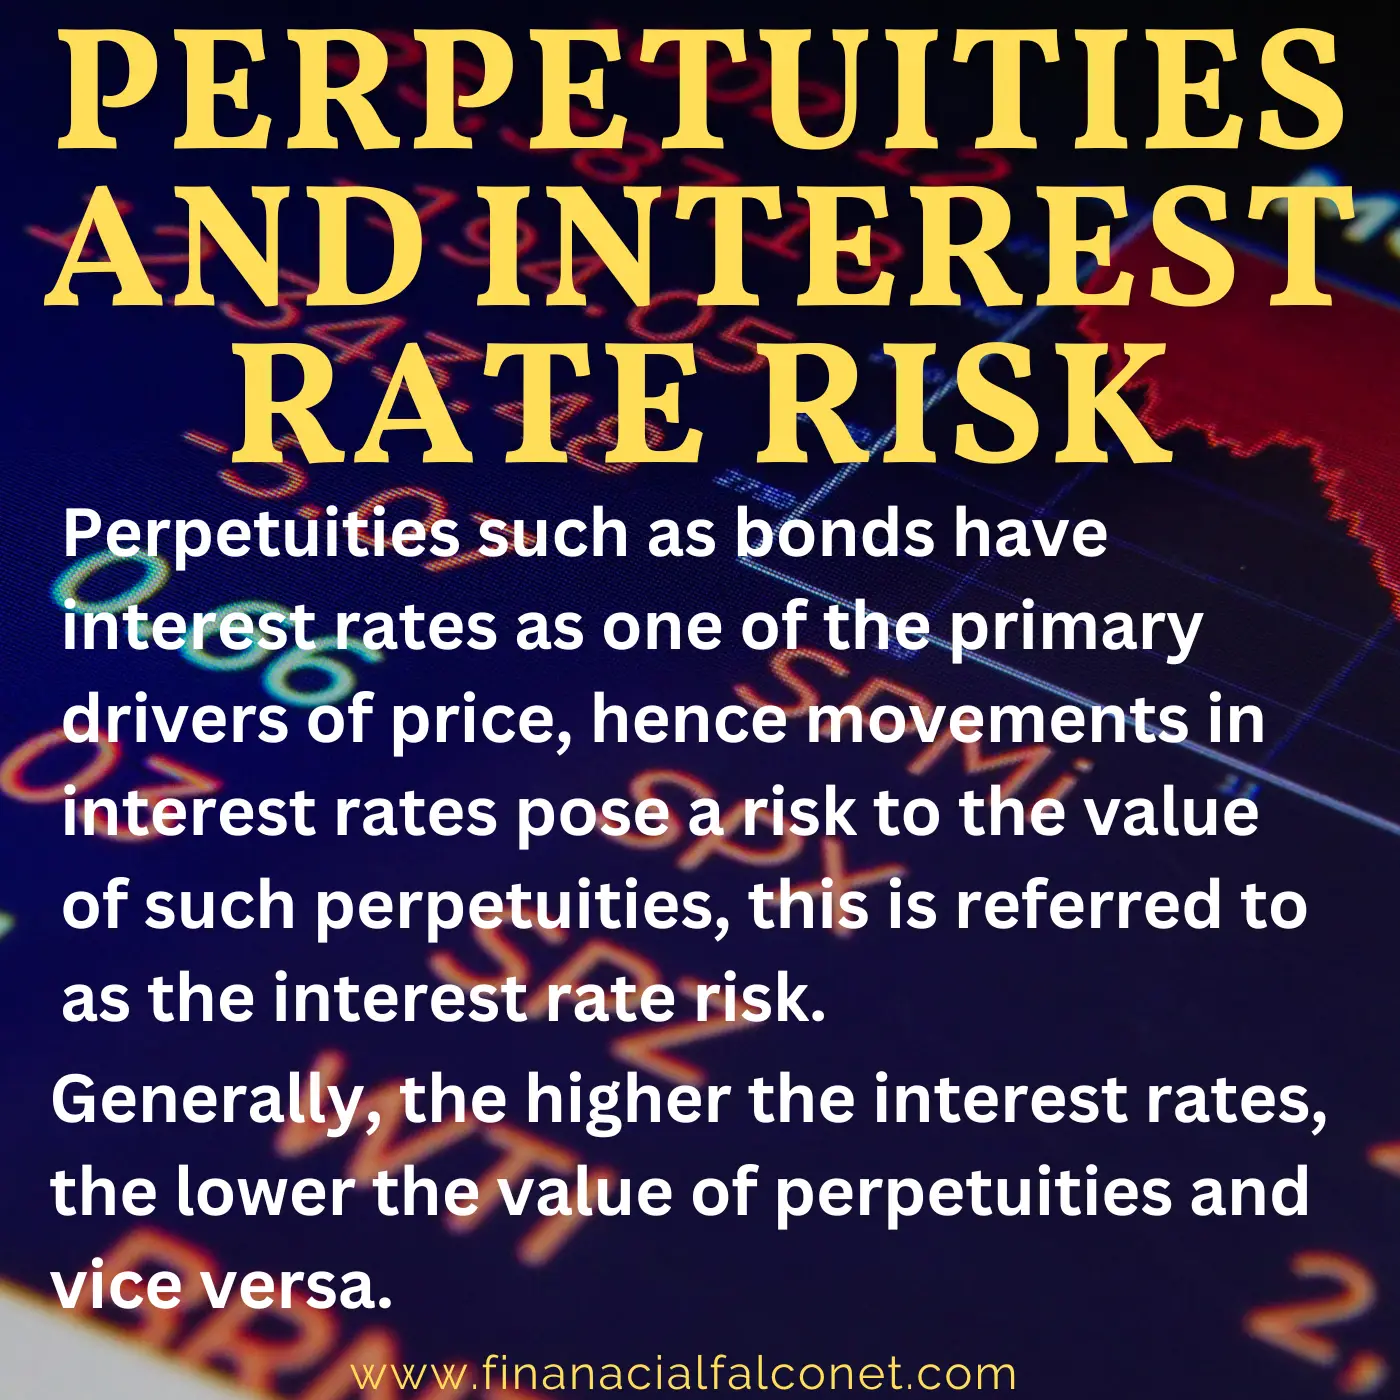 Perpetuities and interest rate risk